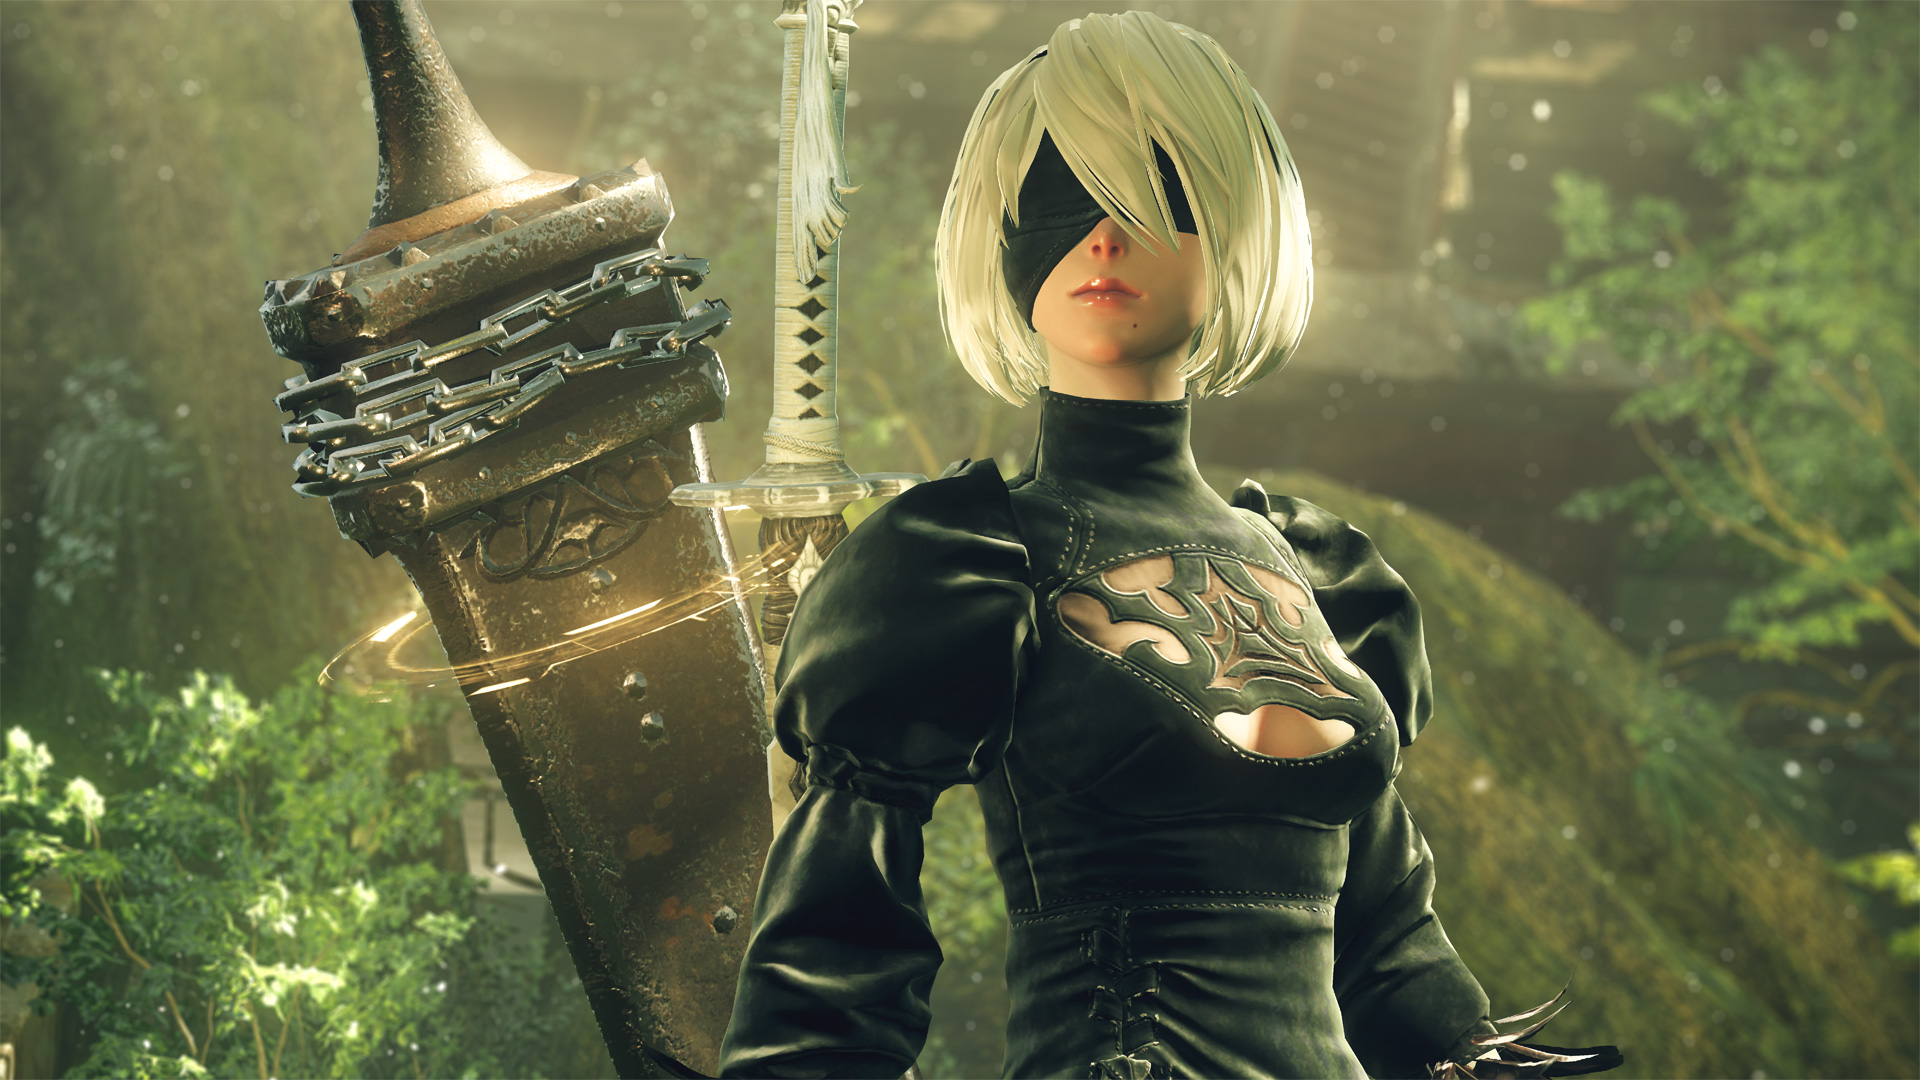 NieR:Automata is finally getting patched on Steam